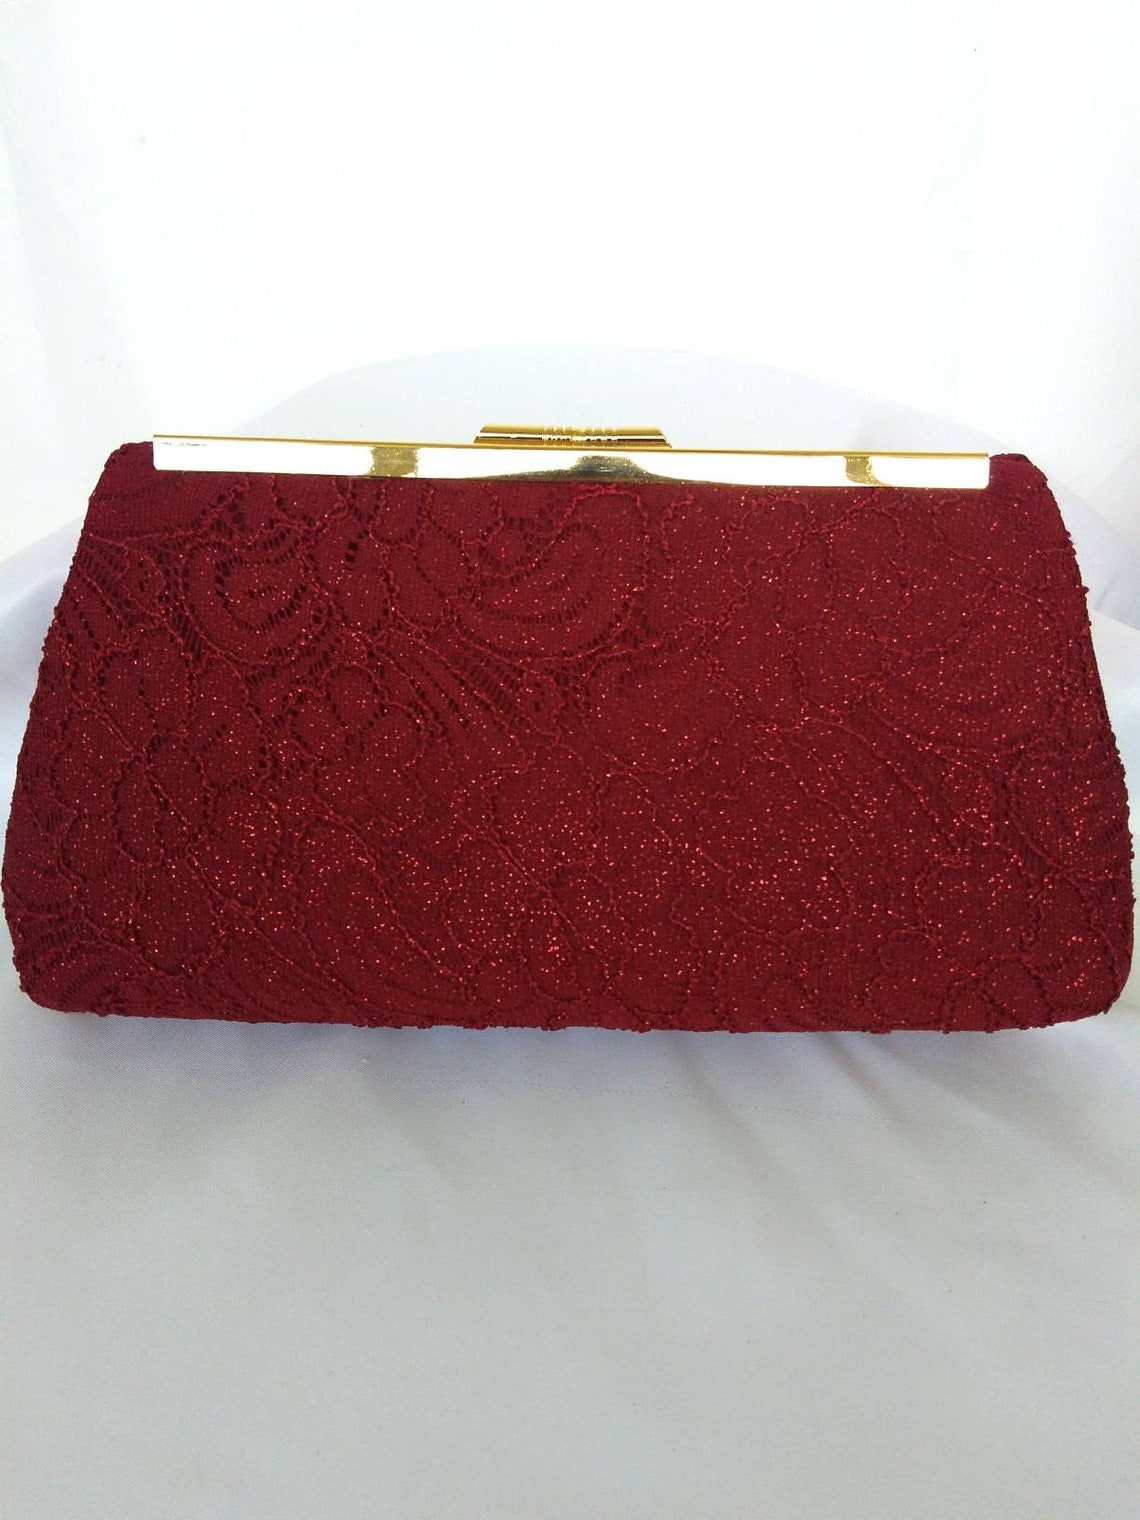 Red lace bridal clutch purse wedding day clutches evening | Etsy